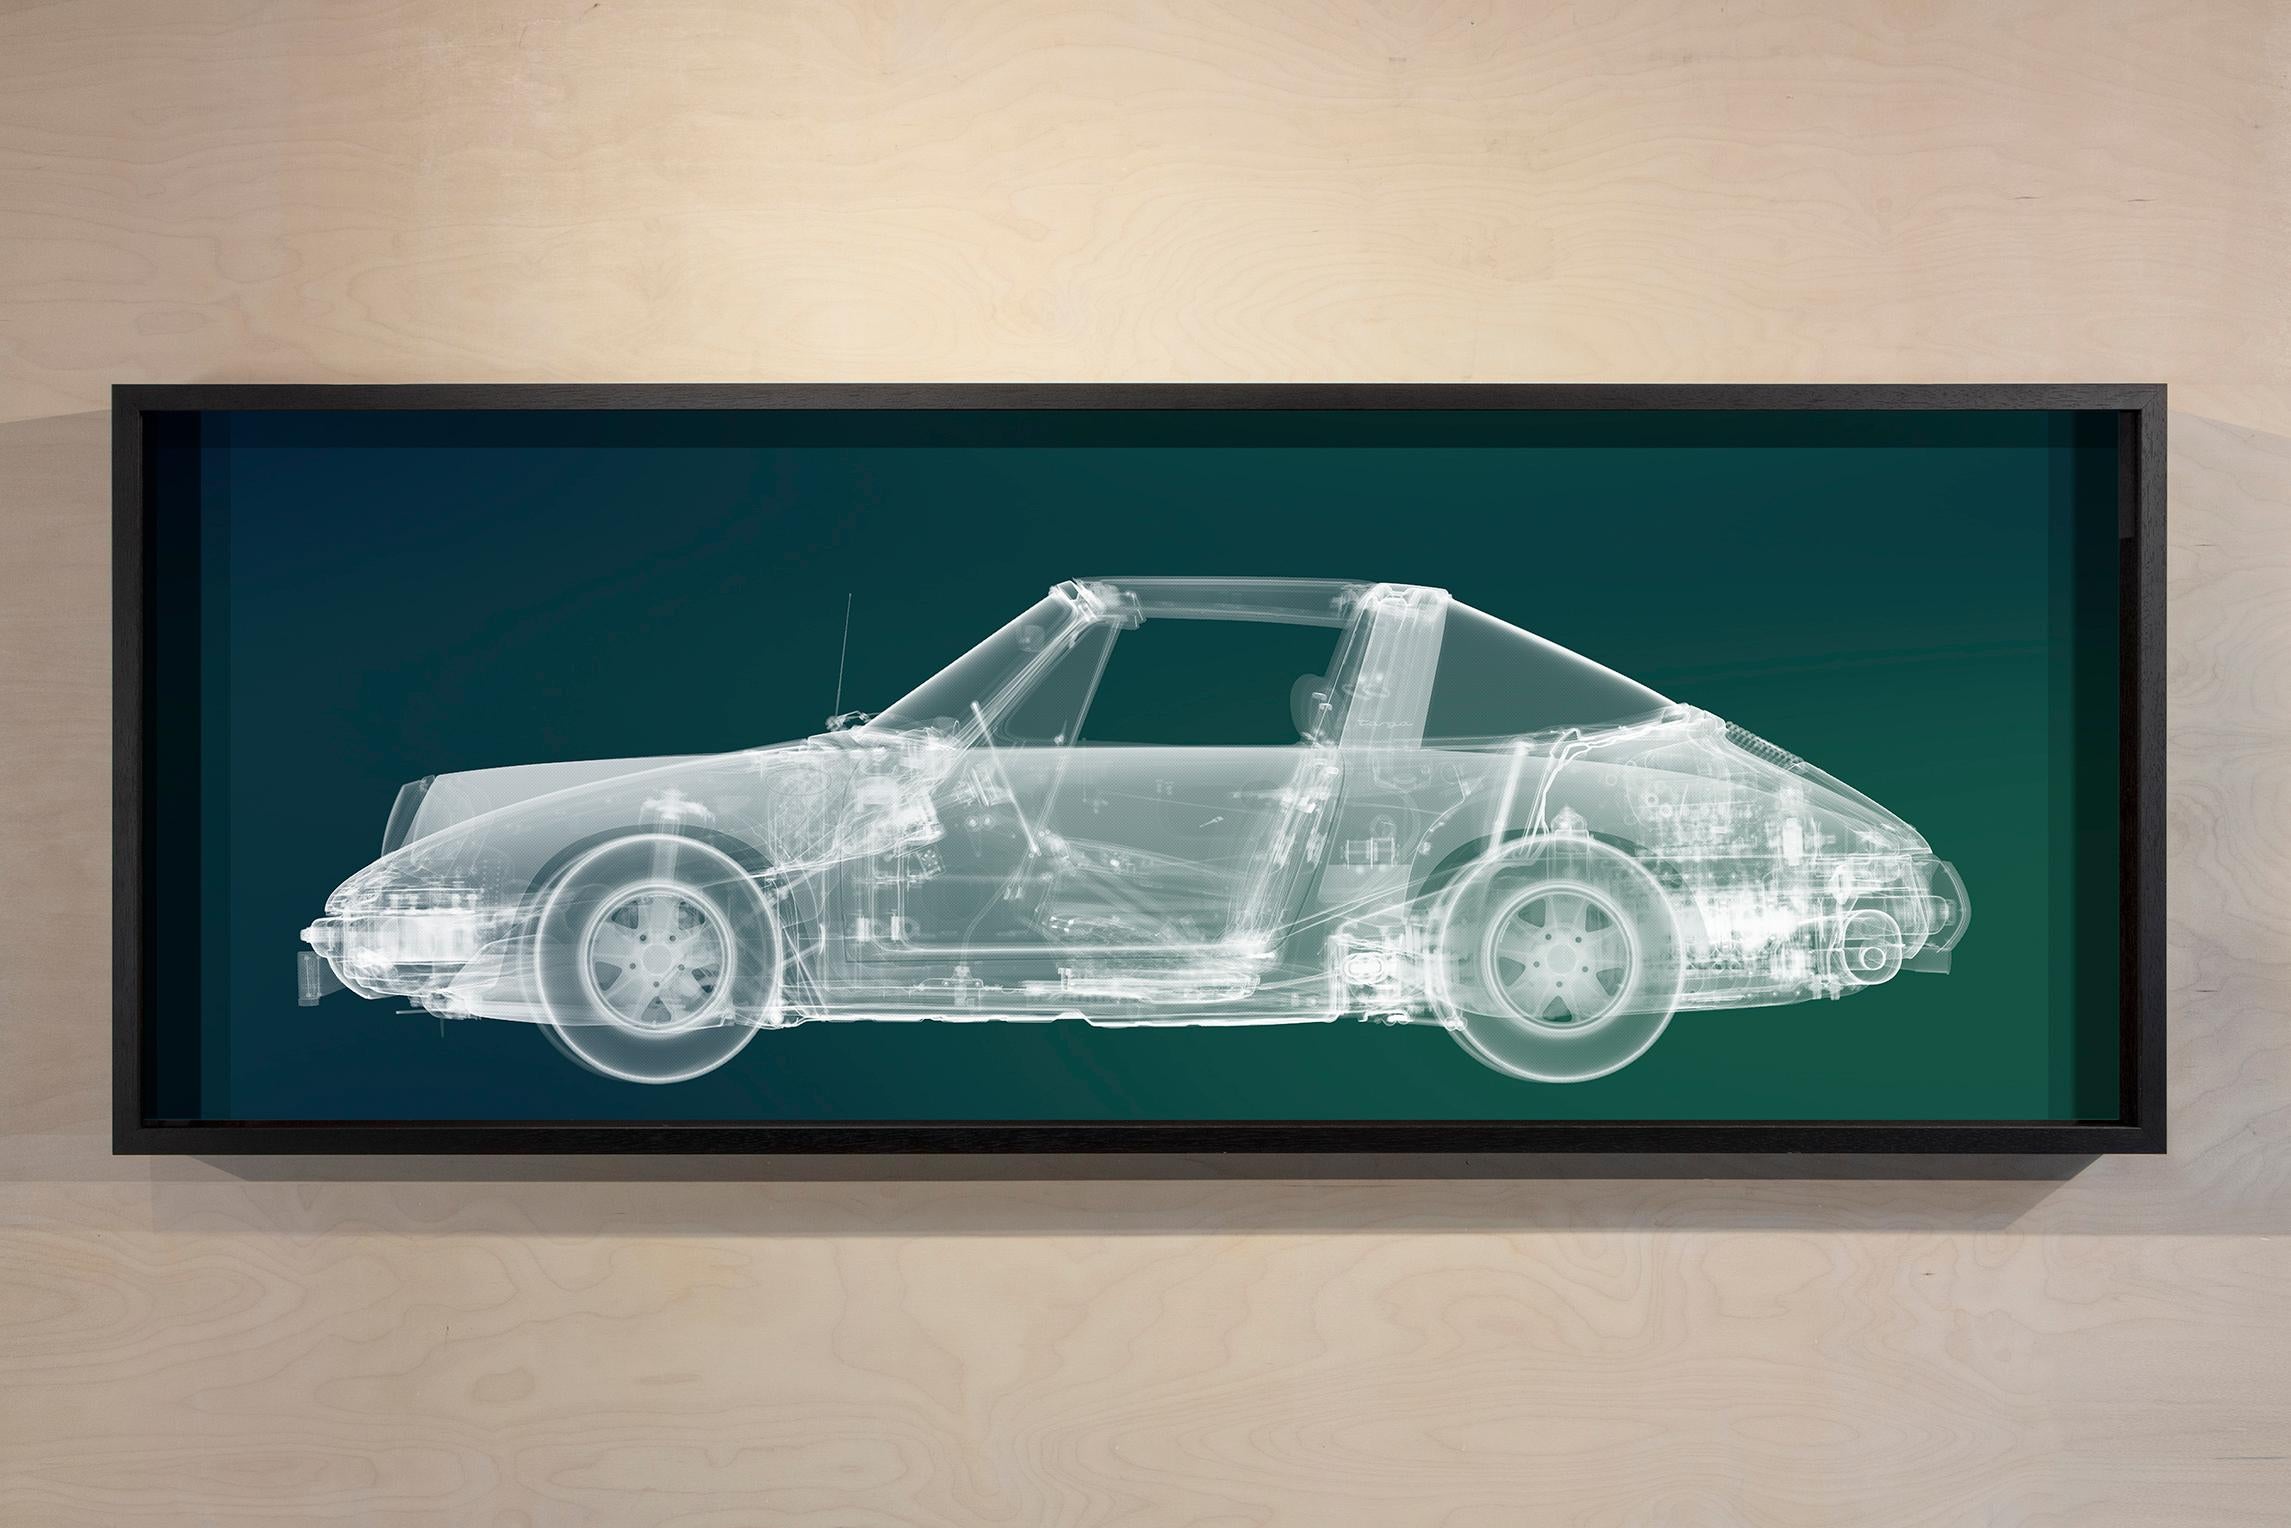 Nick Veasey Figurative Photograph - White Porsche (on teal and blue)